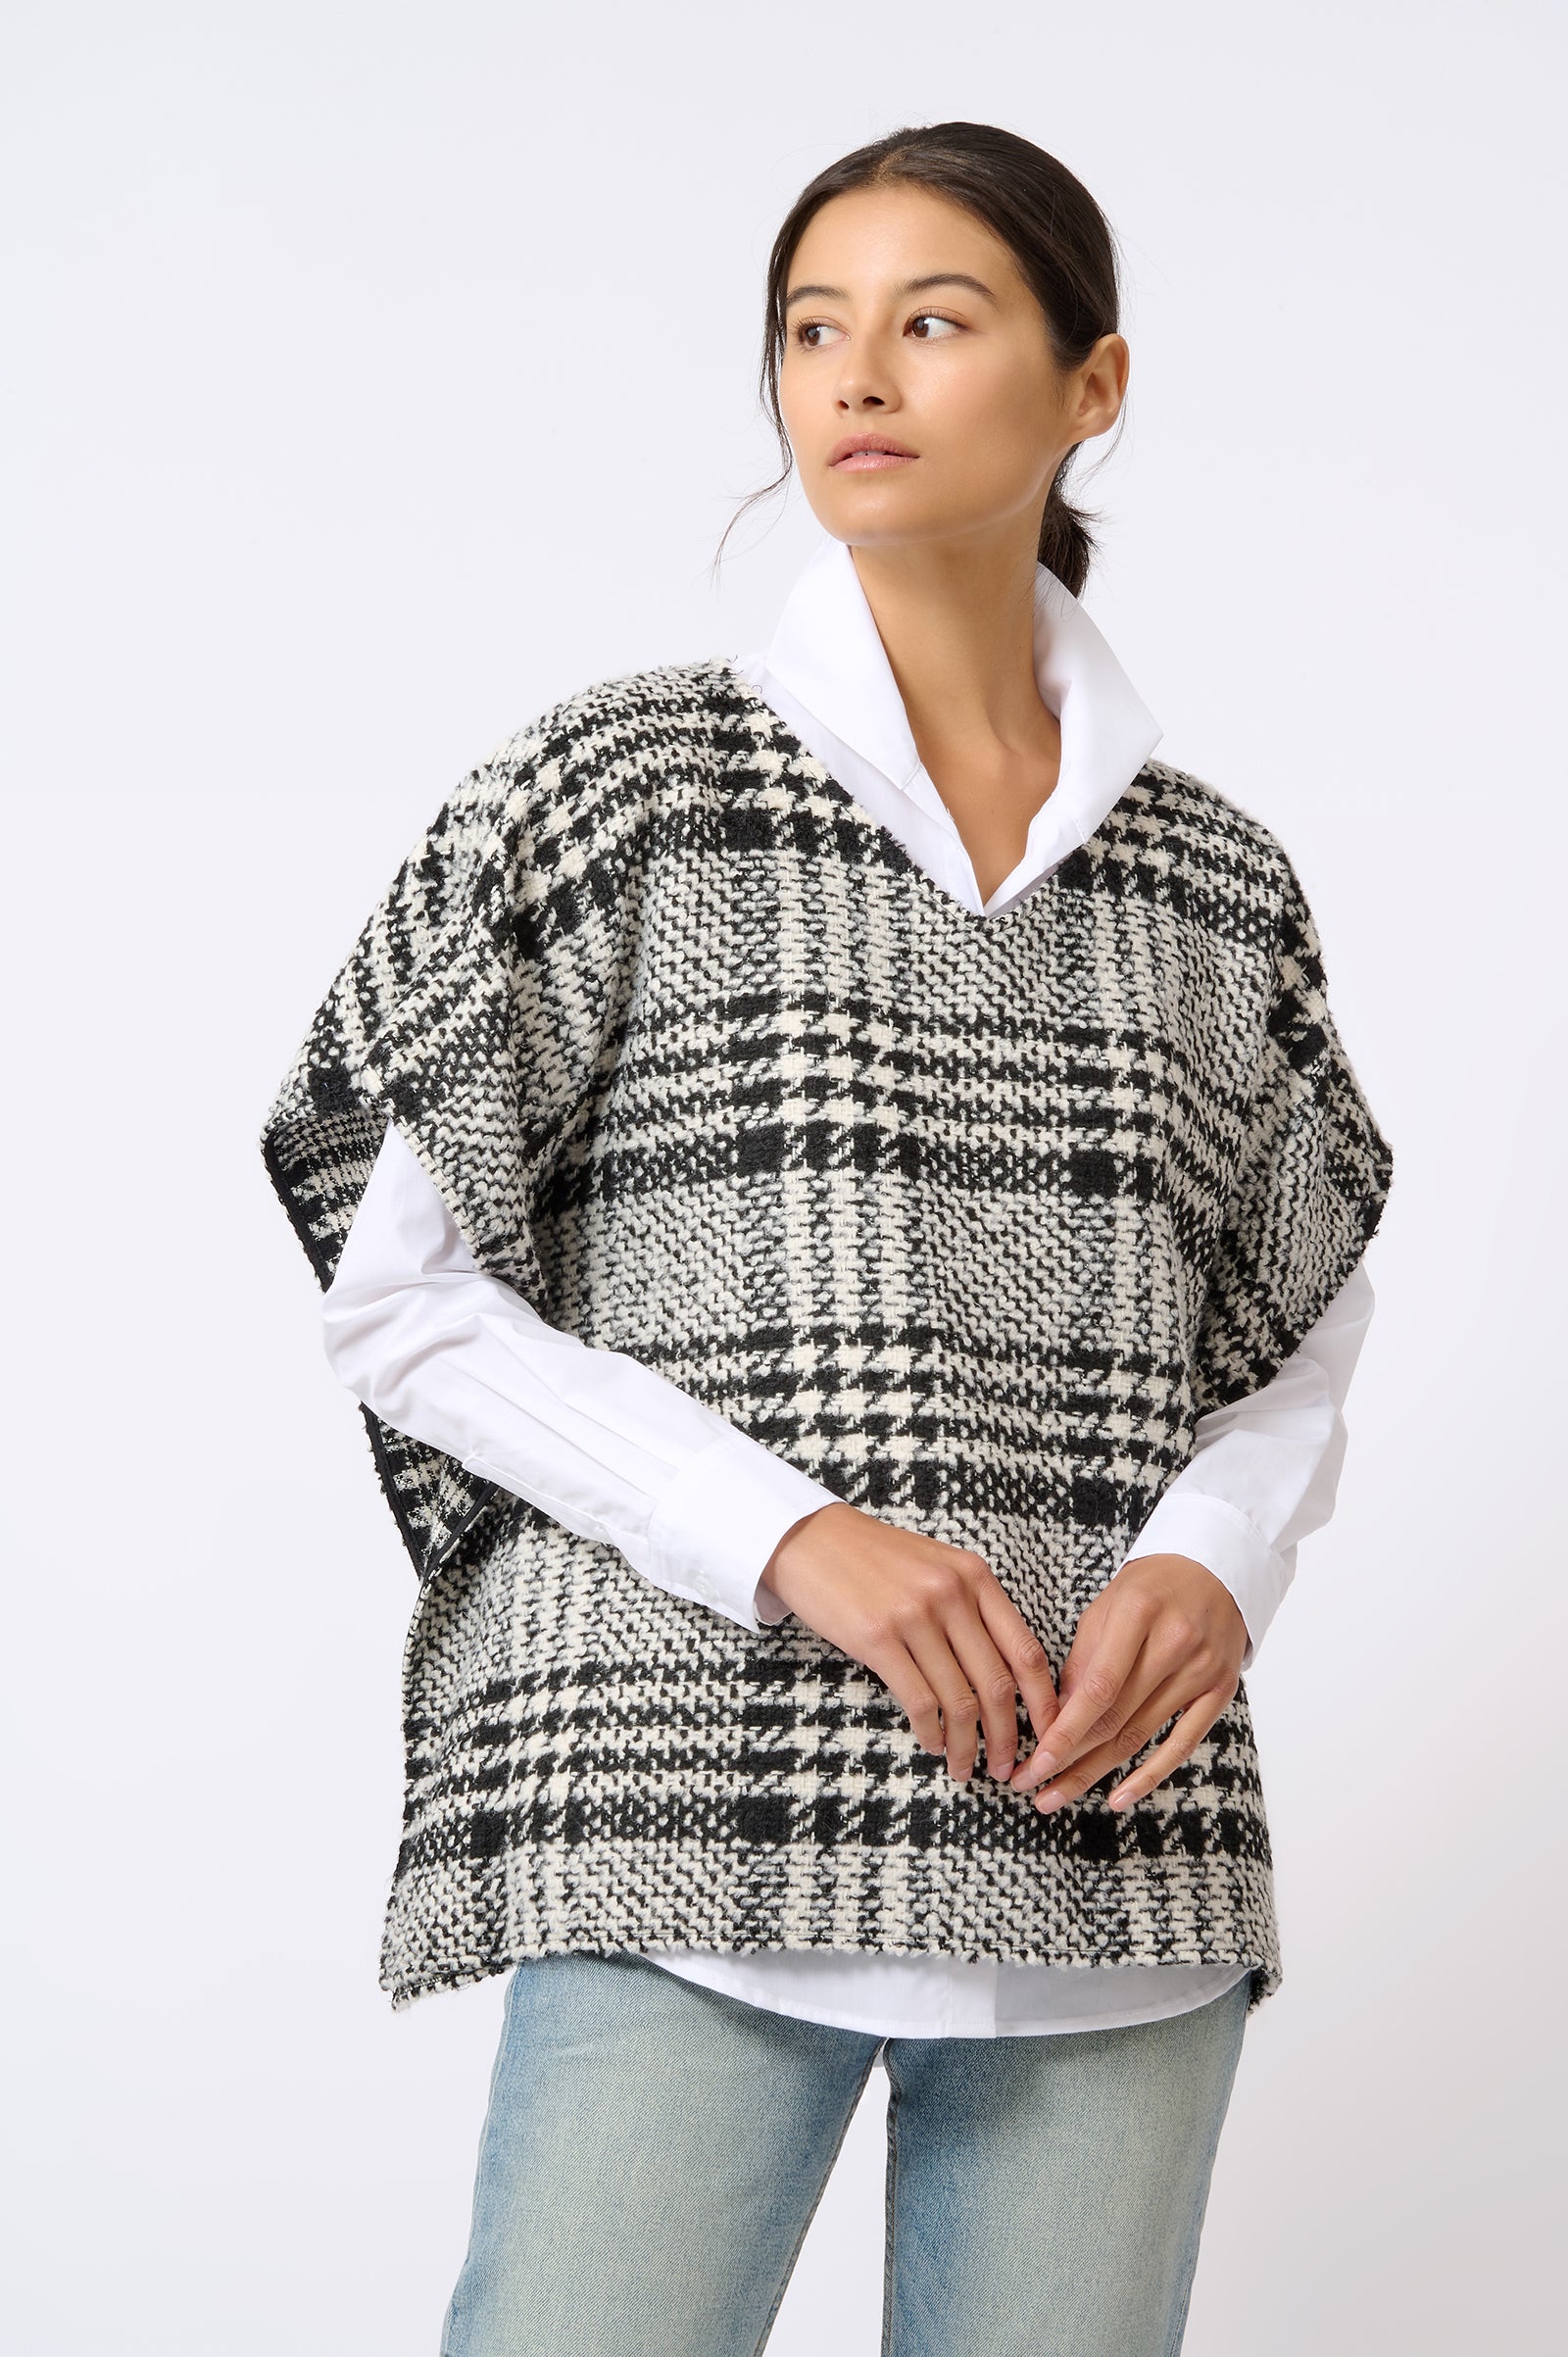 Kal Rieman Plaid Poncho in Black and White Plaid on Model with Hands in Front Front View